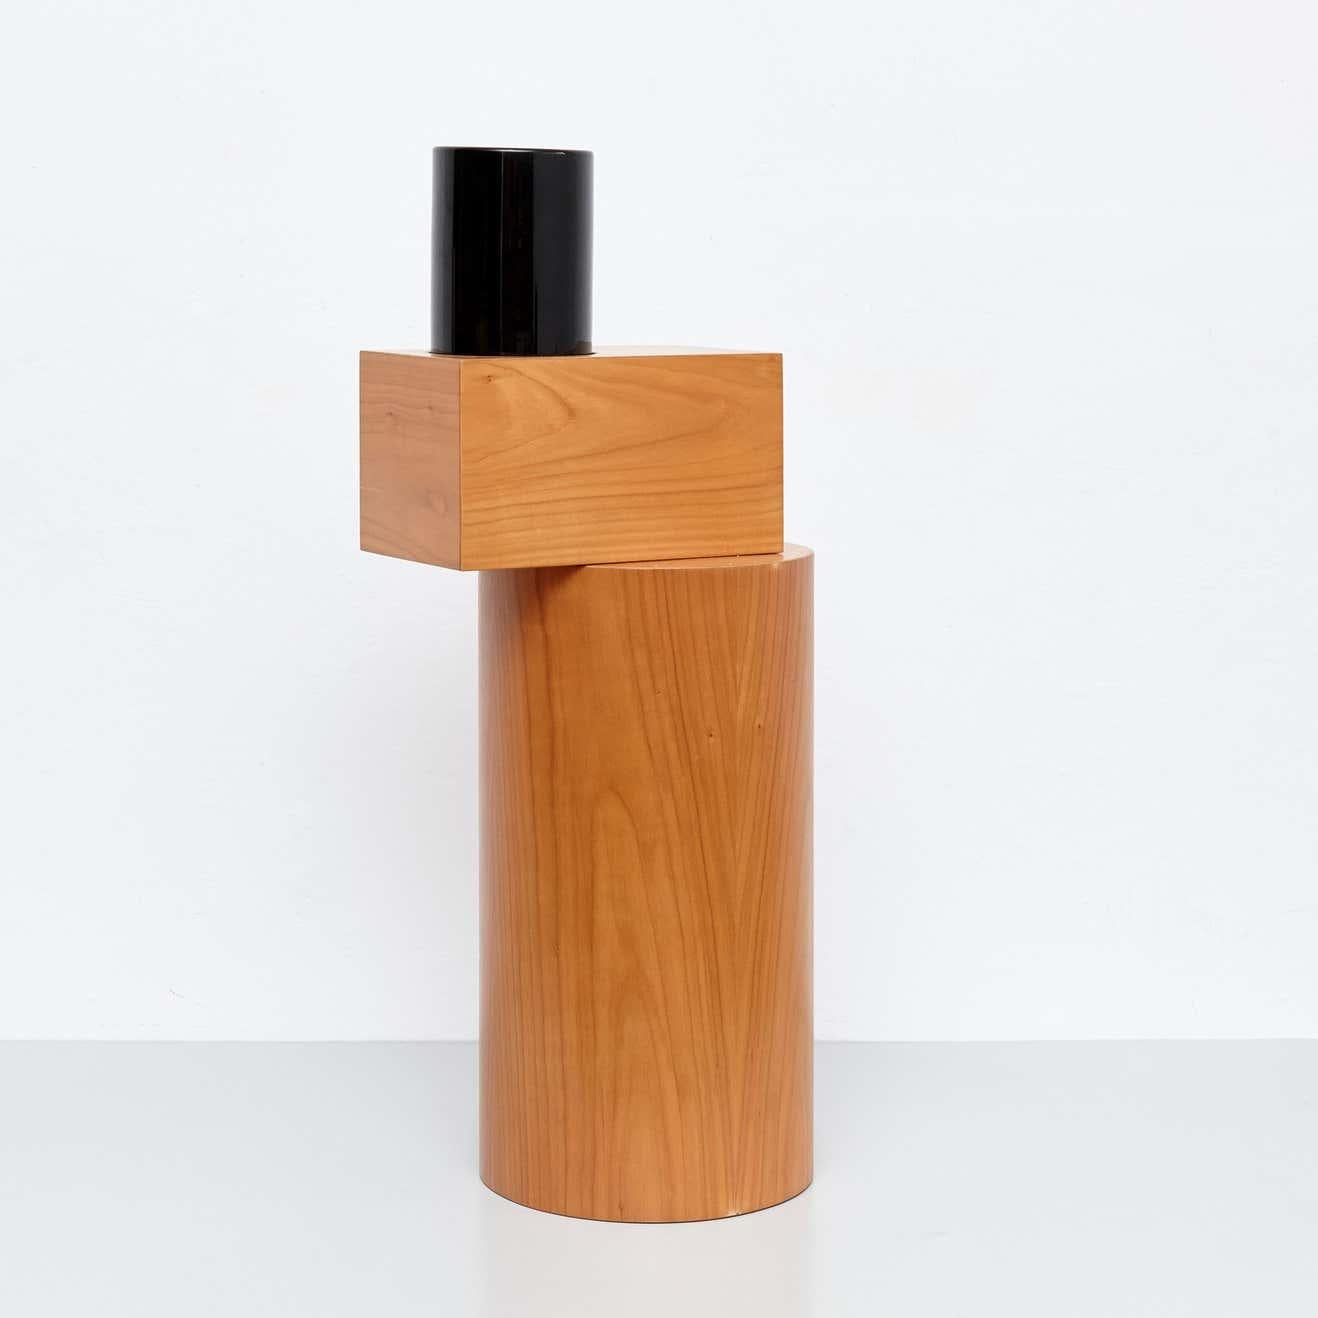 European Twenty-Seven Woods for a Chinese Artificial Flower Vase U by Ettore Sottsass